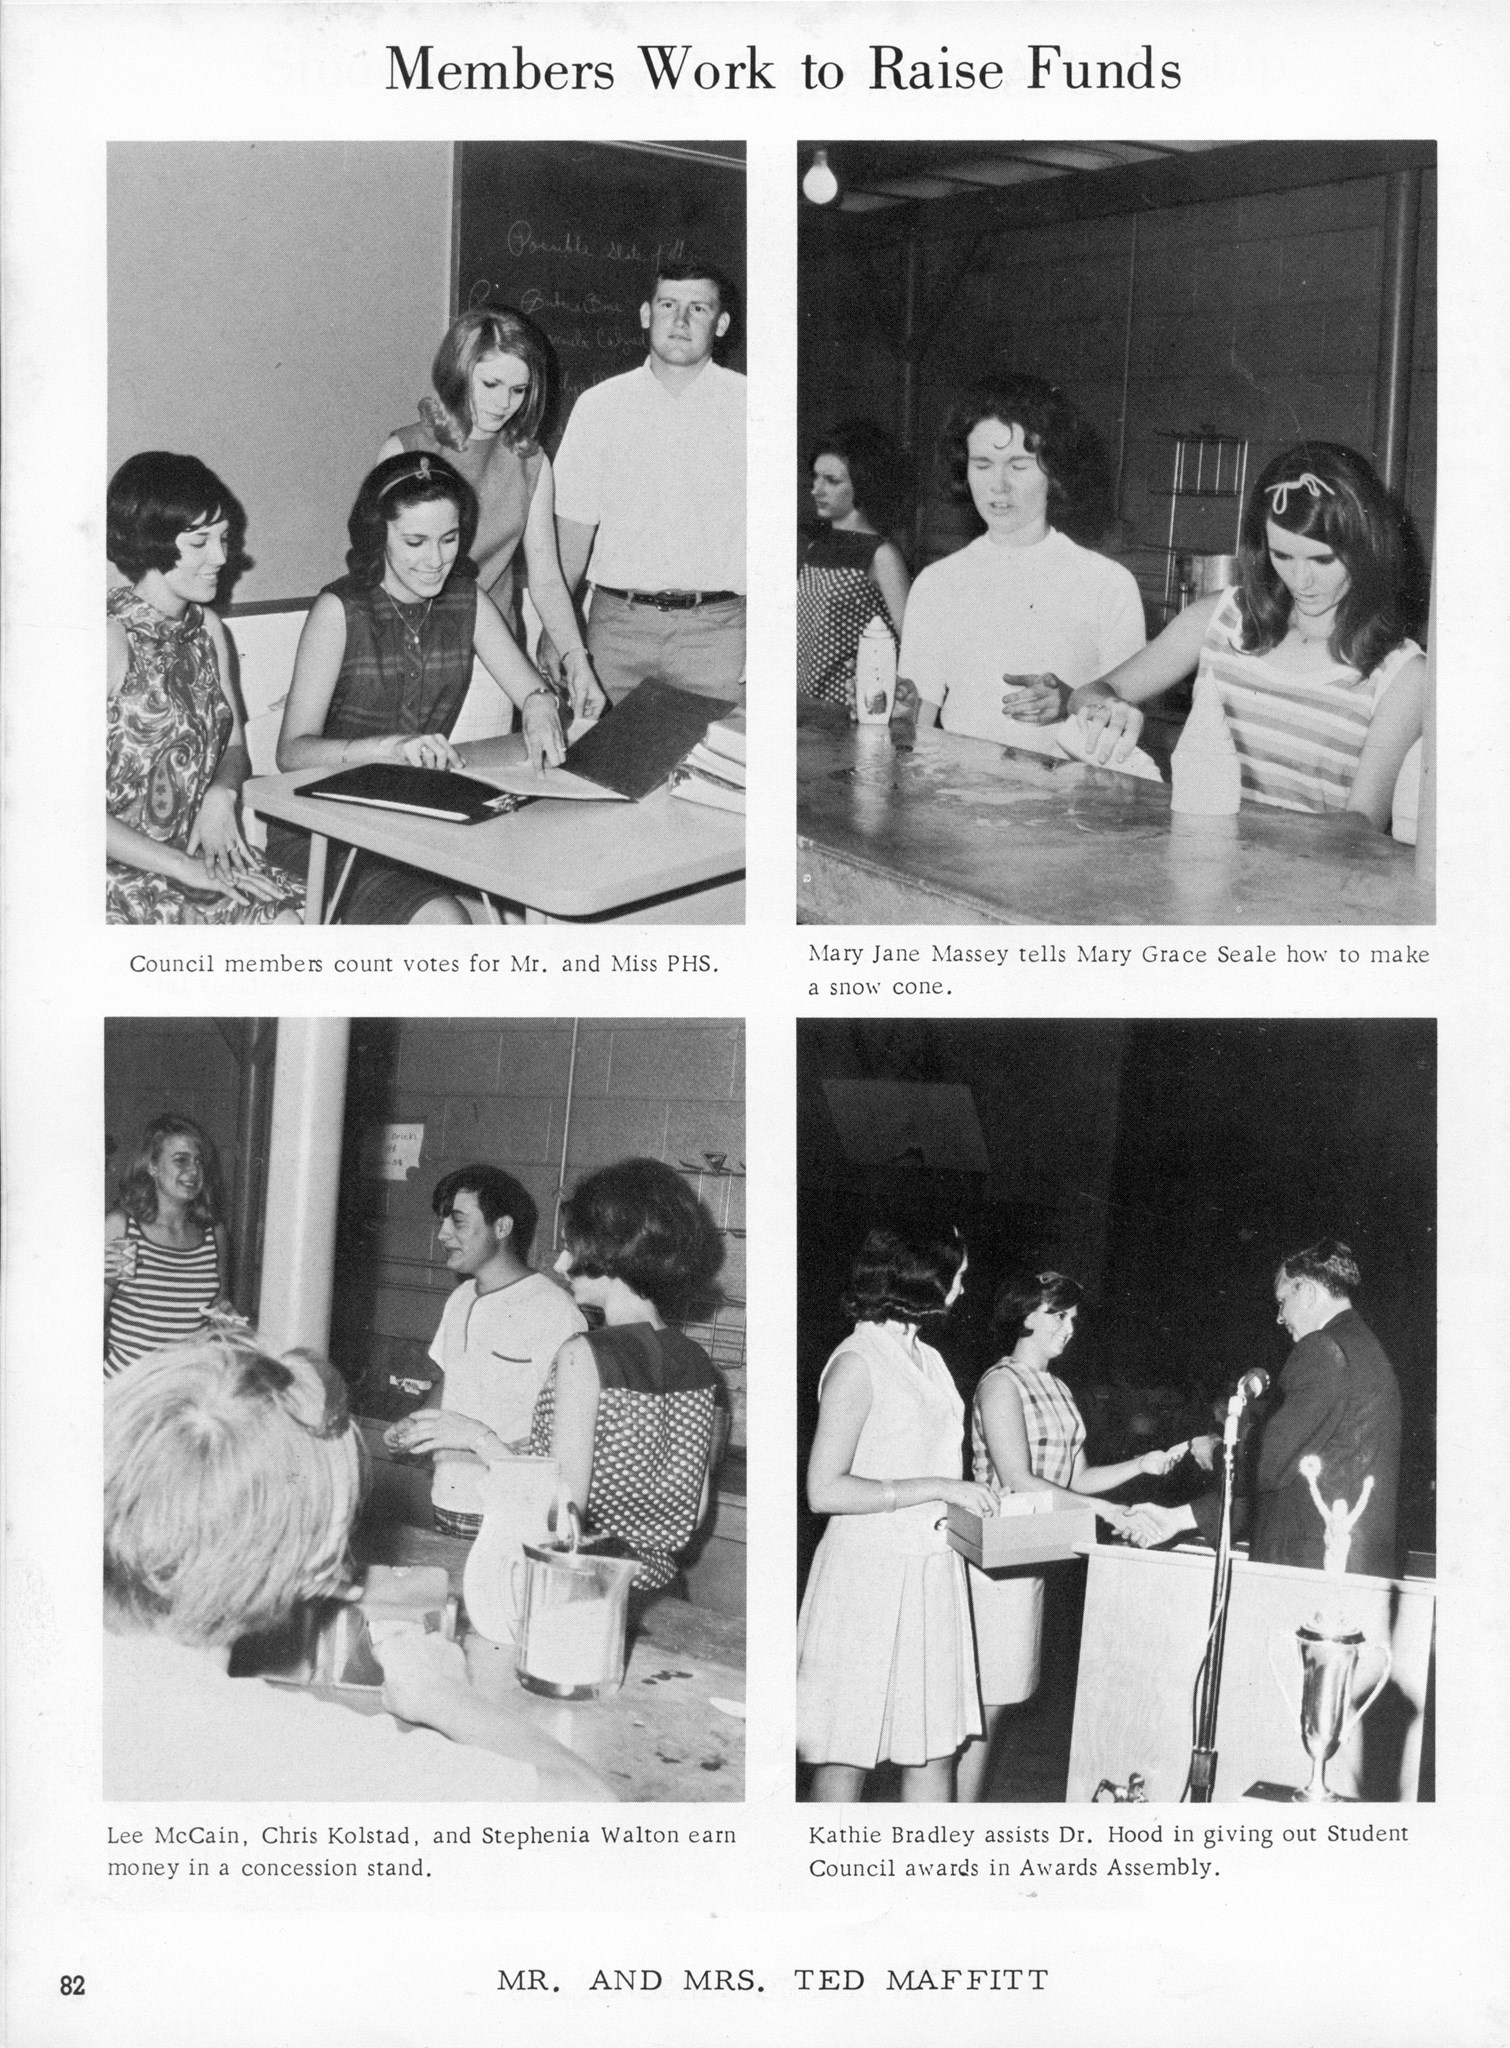 ../../../Images/Large/1967/Arclight-1967-pg0082.jpg